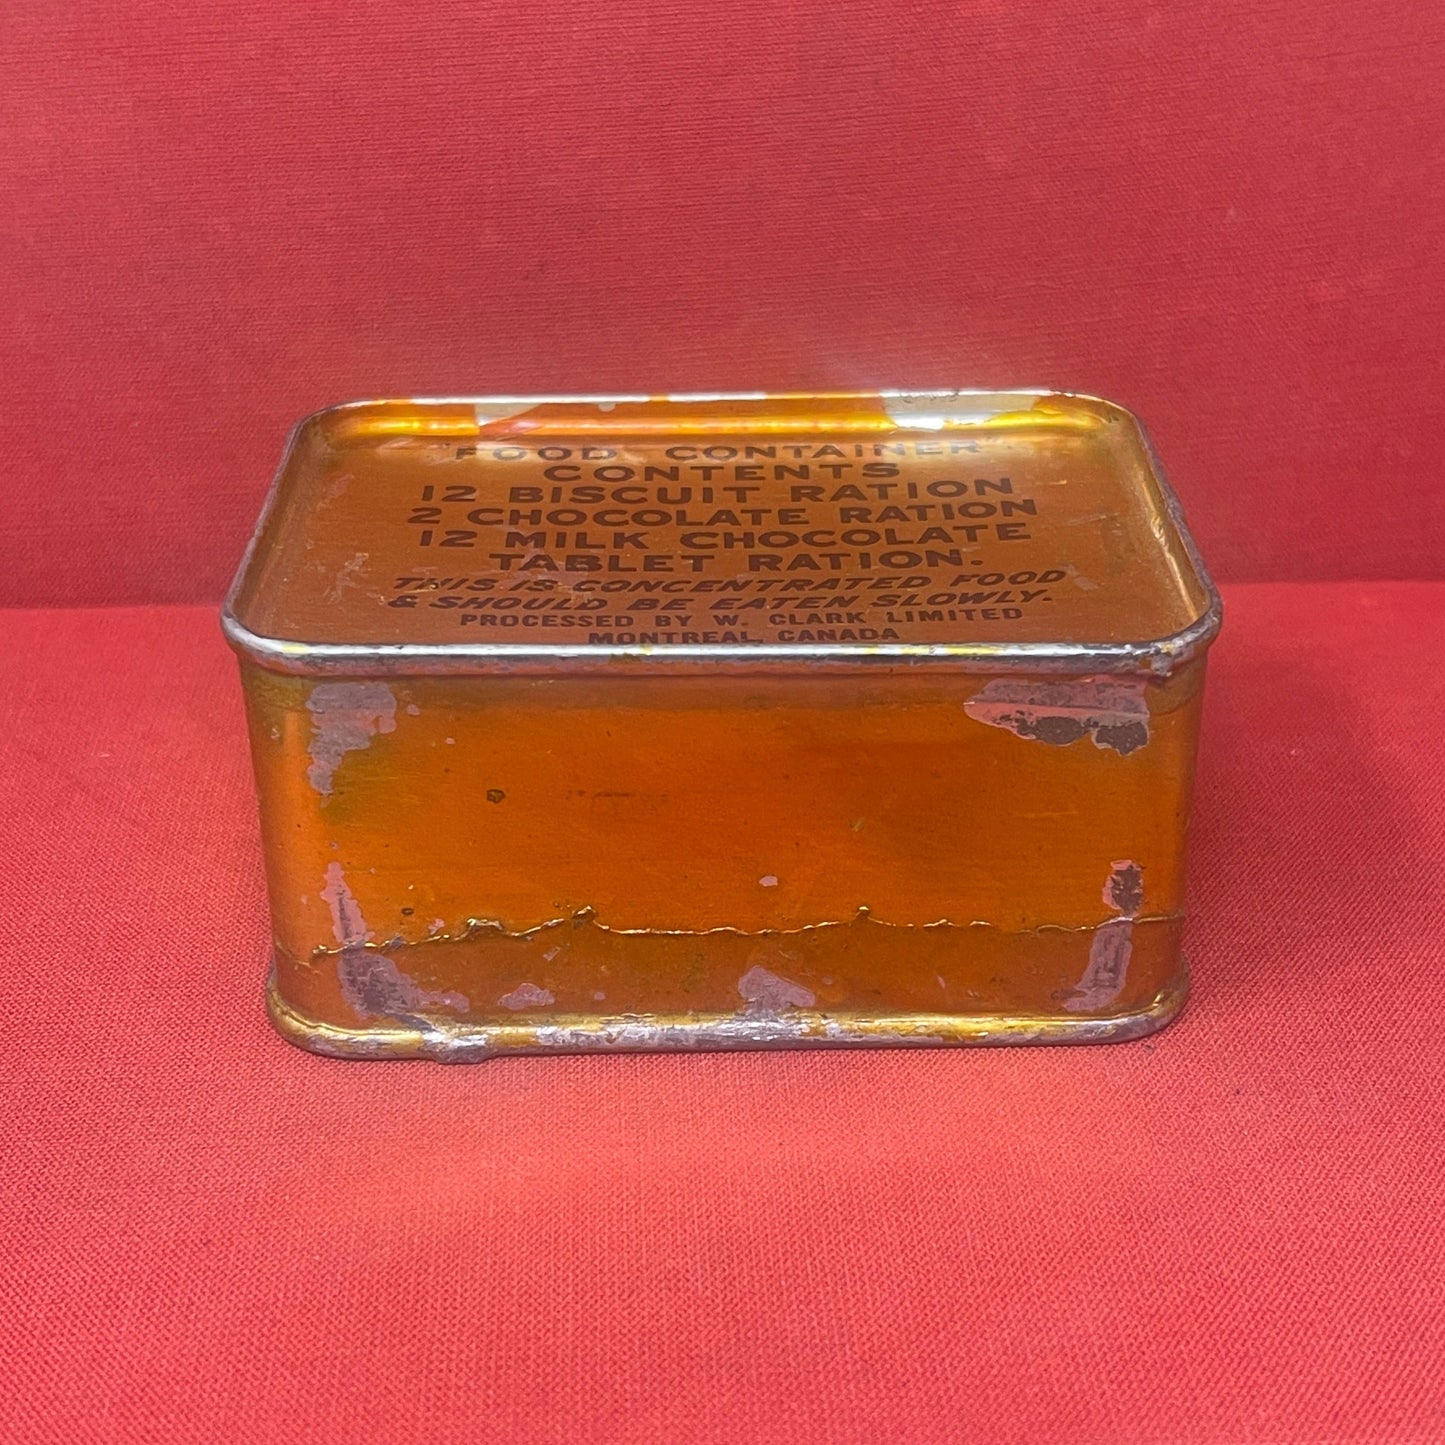 1945 Dated Canadian Food Container Emergency Ration